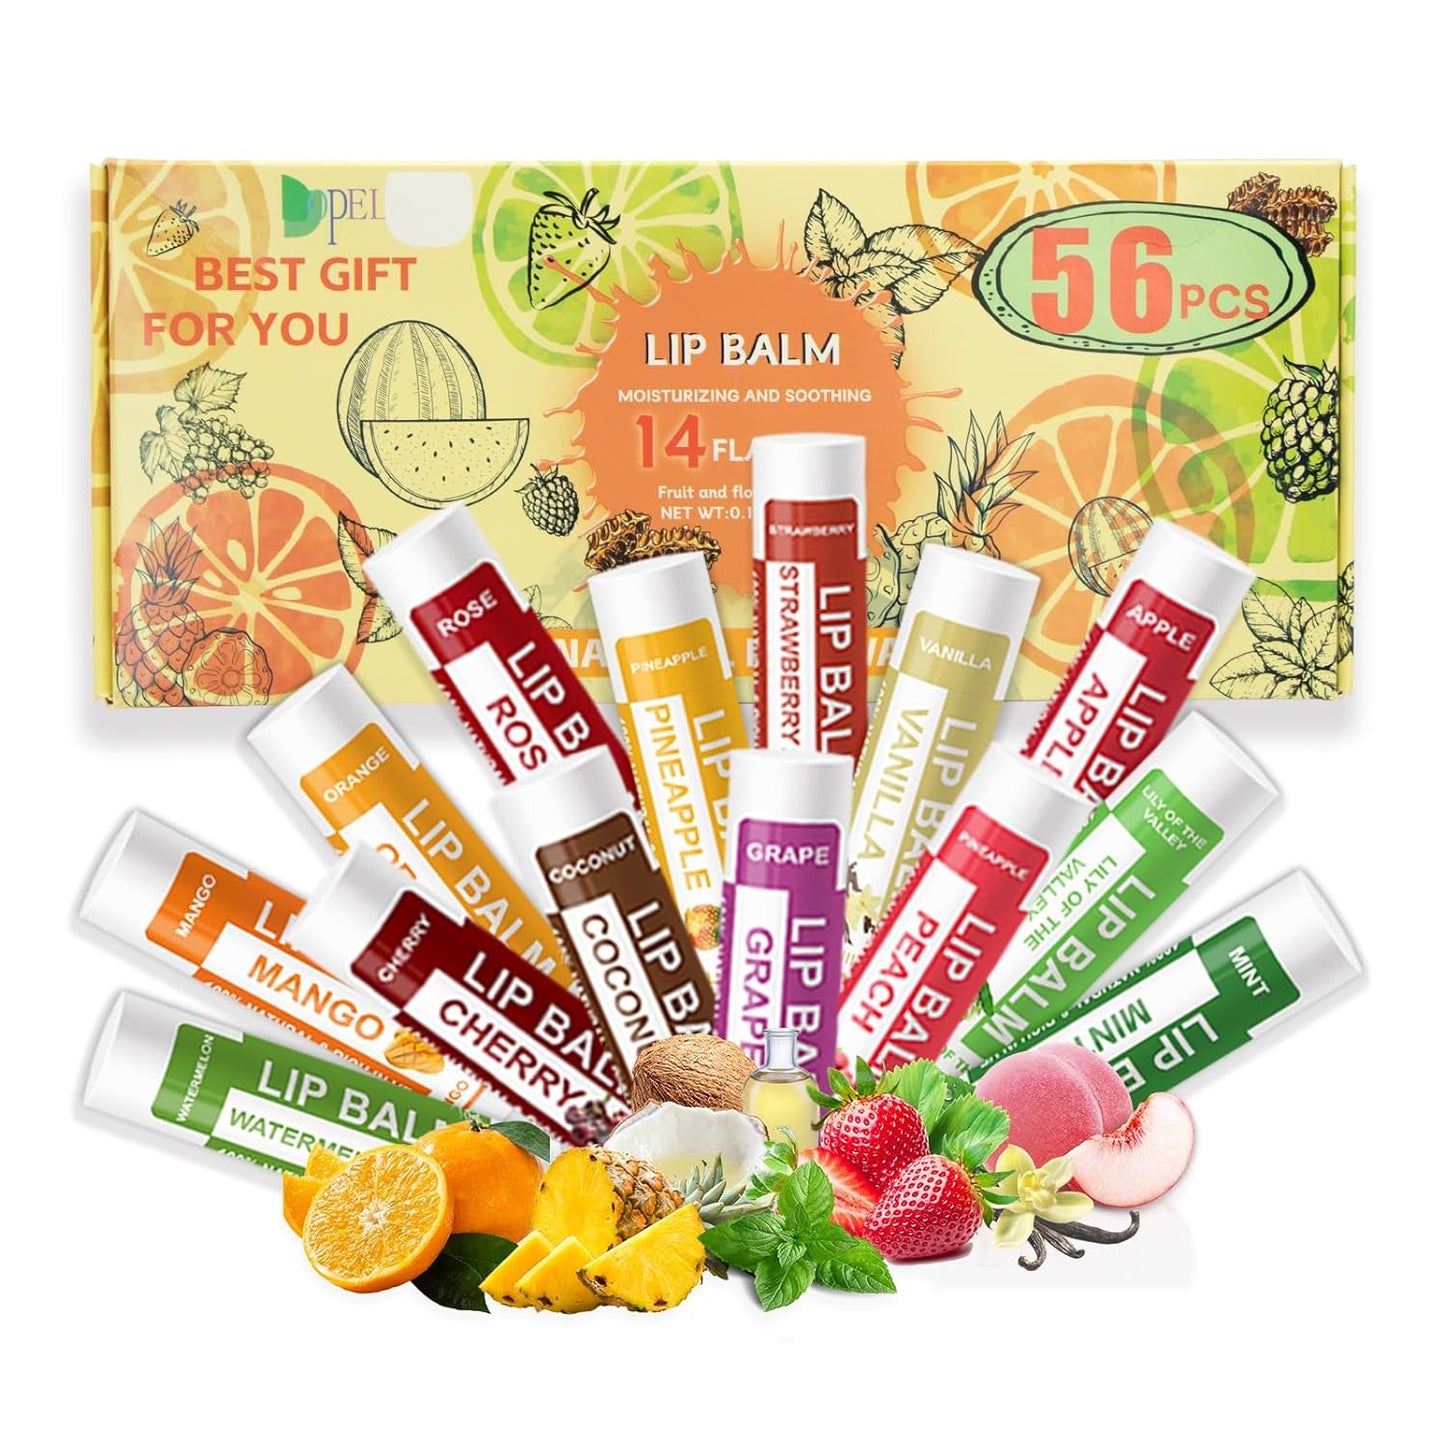 Yopela 56 Pack Natural Lip Balm in Sets with Vitamin E and Coconut Oil